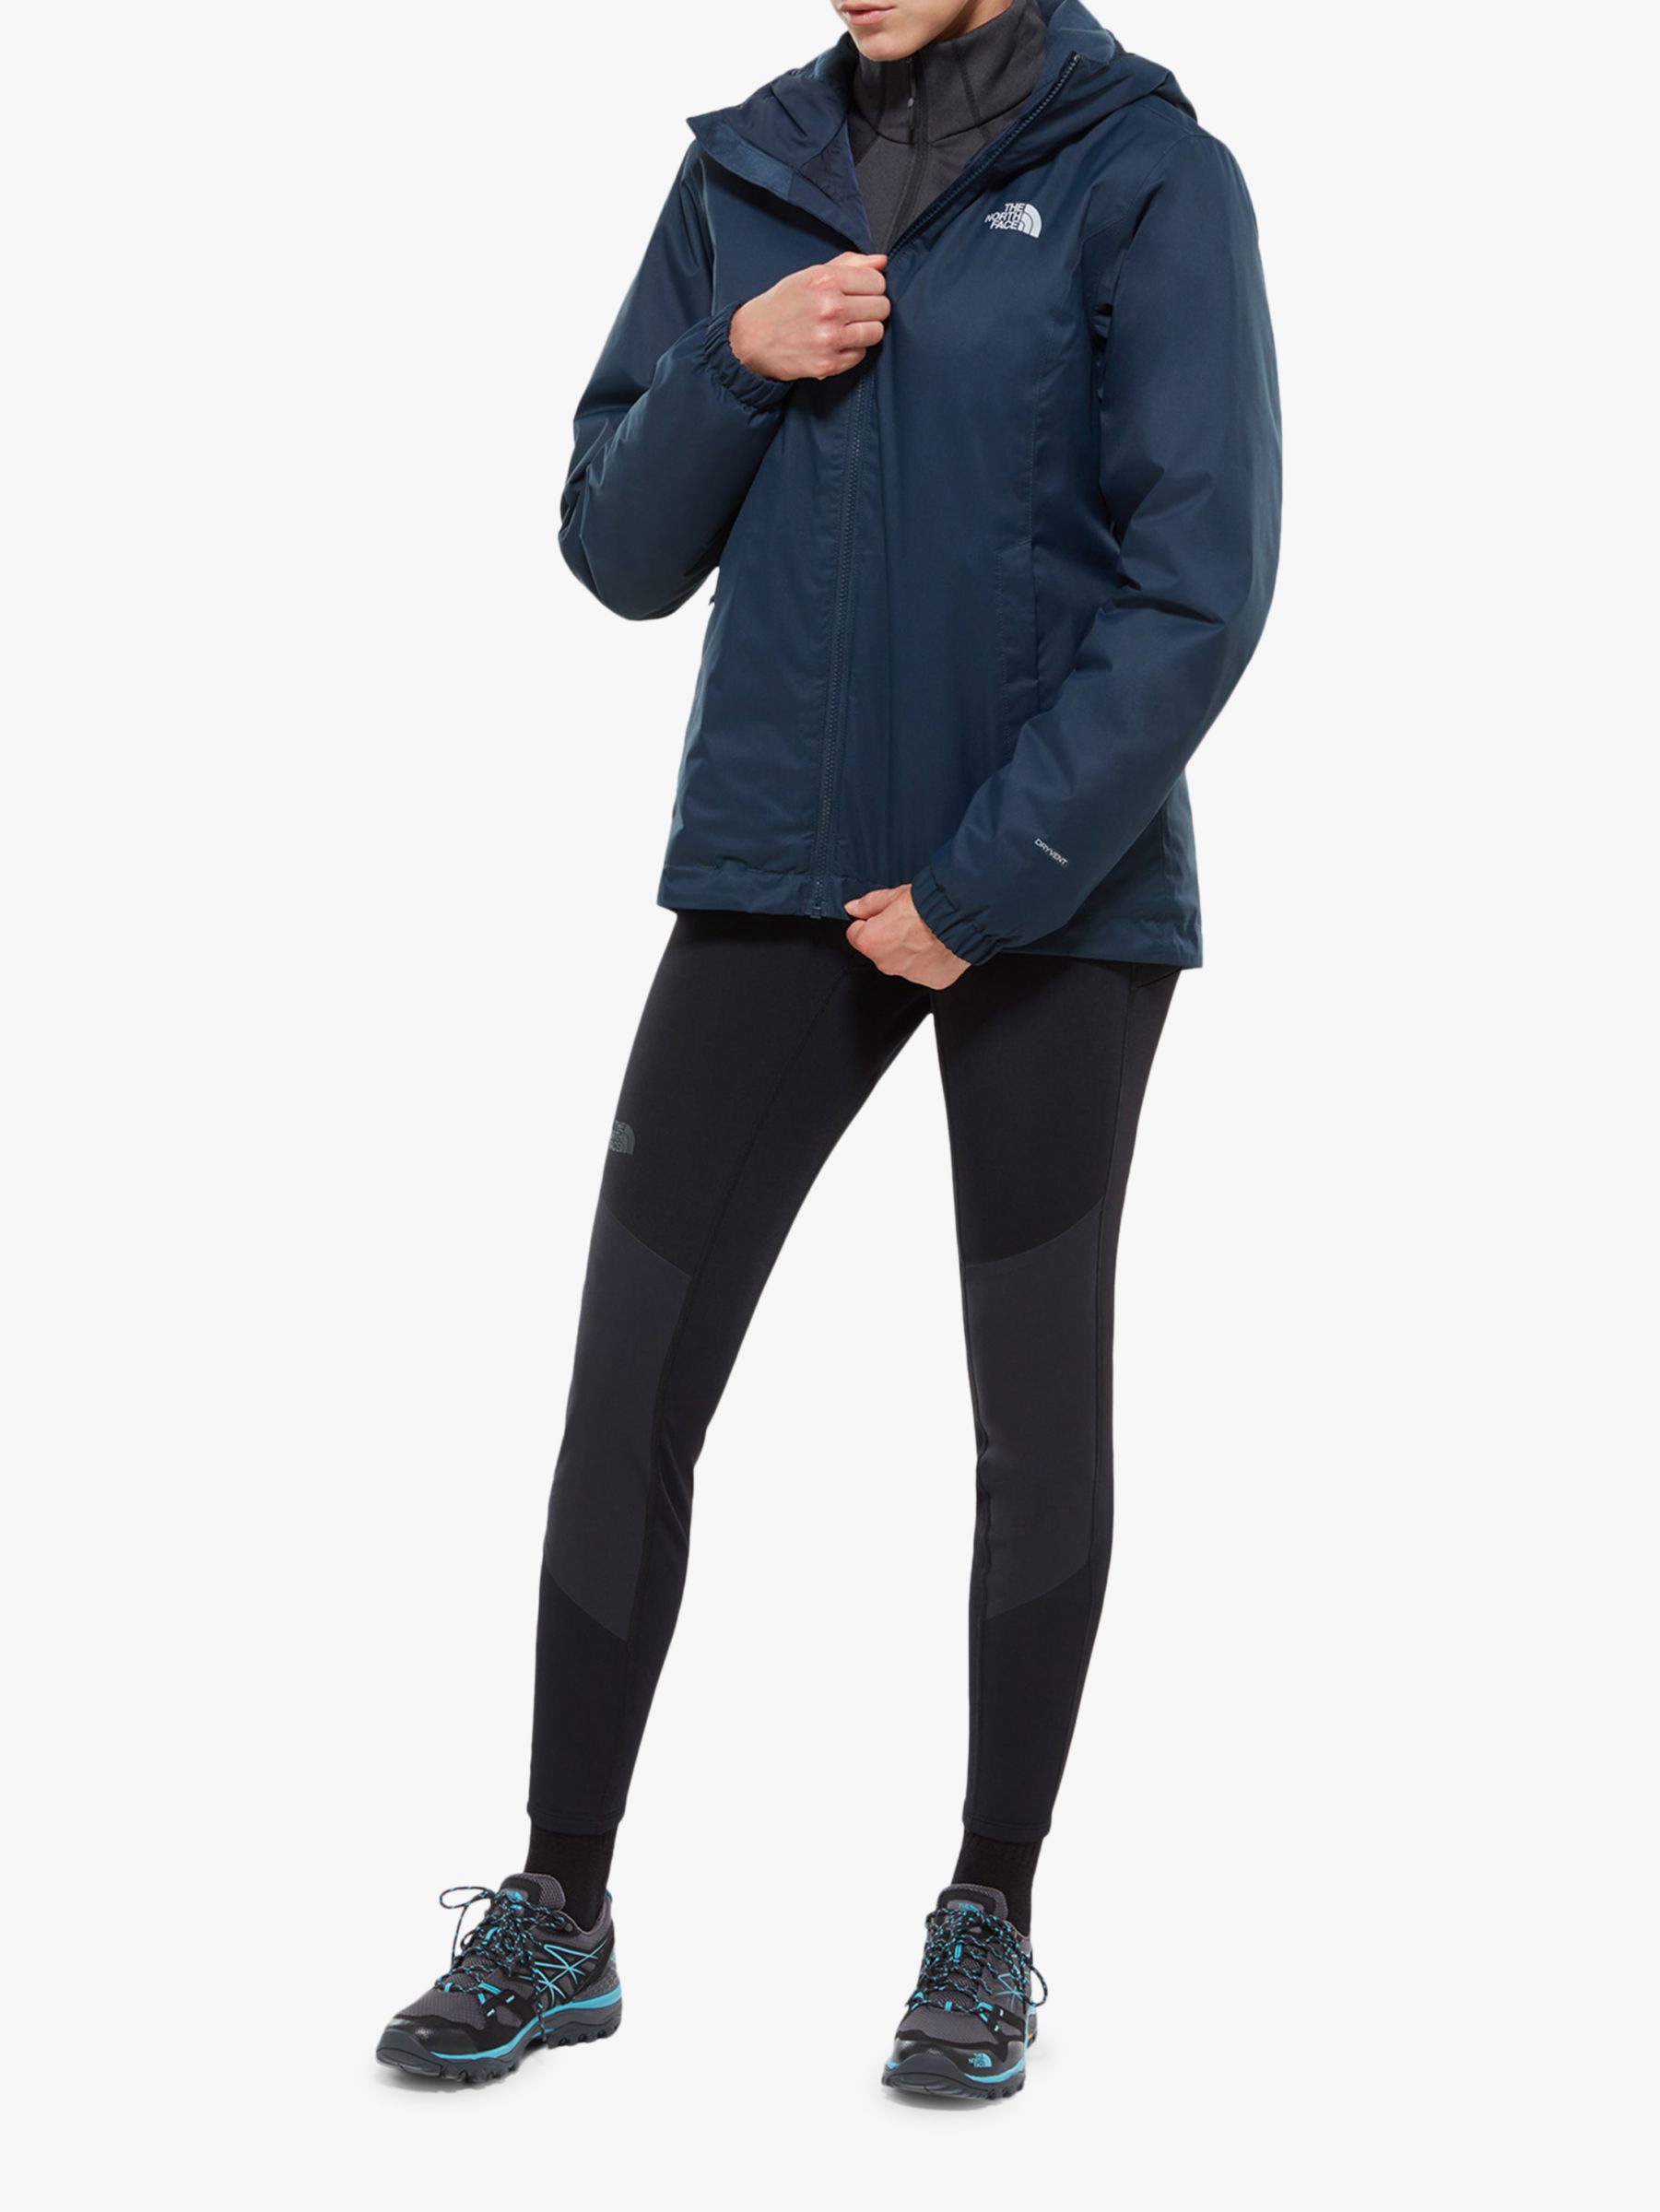 womens quest insulated jacket